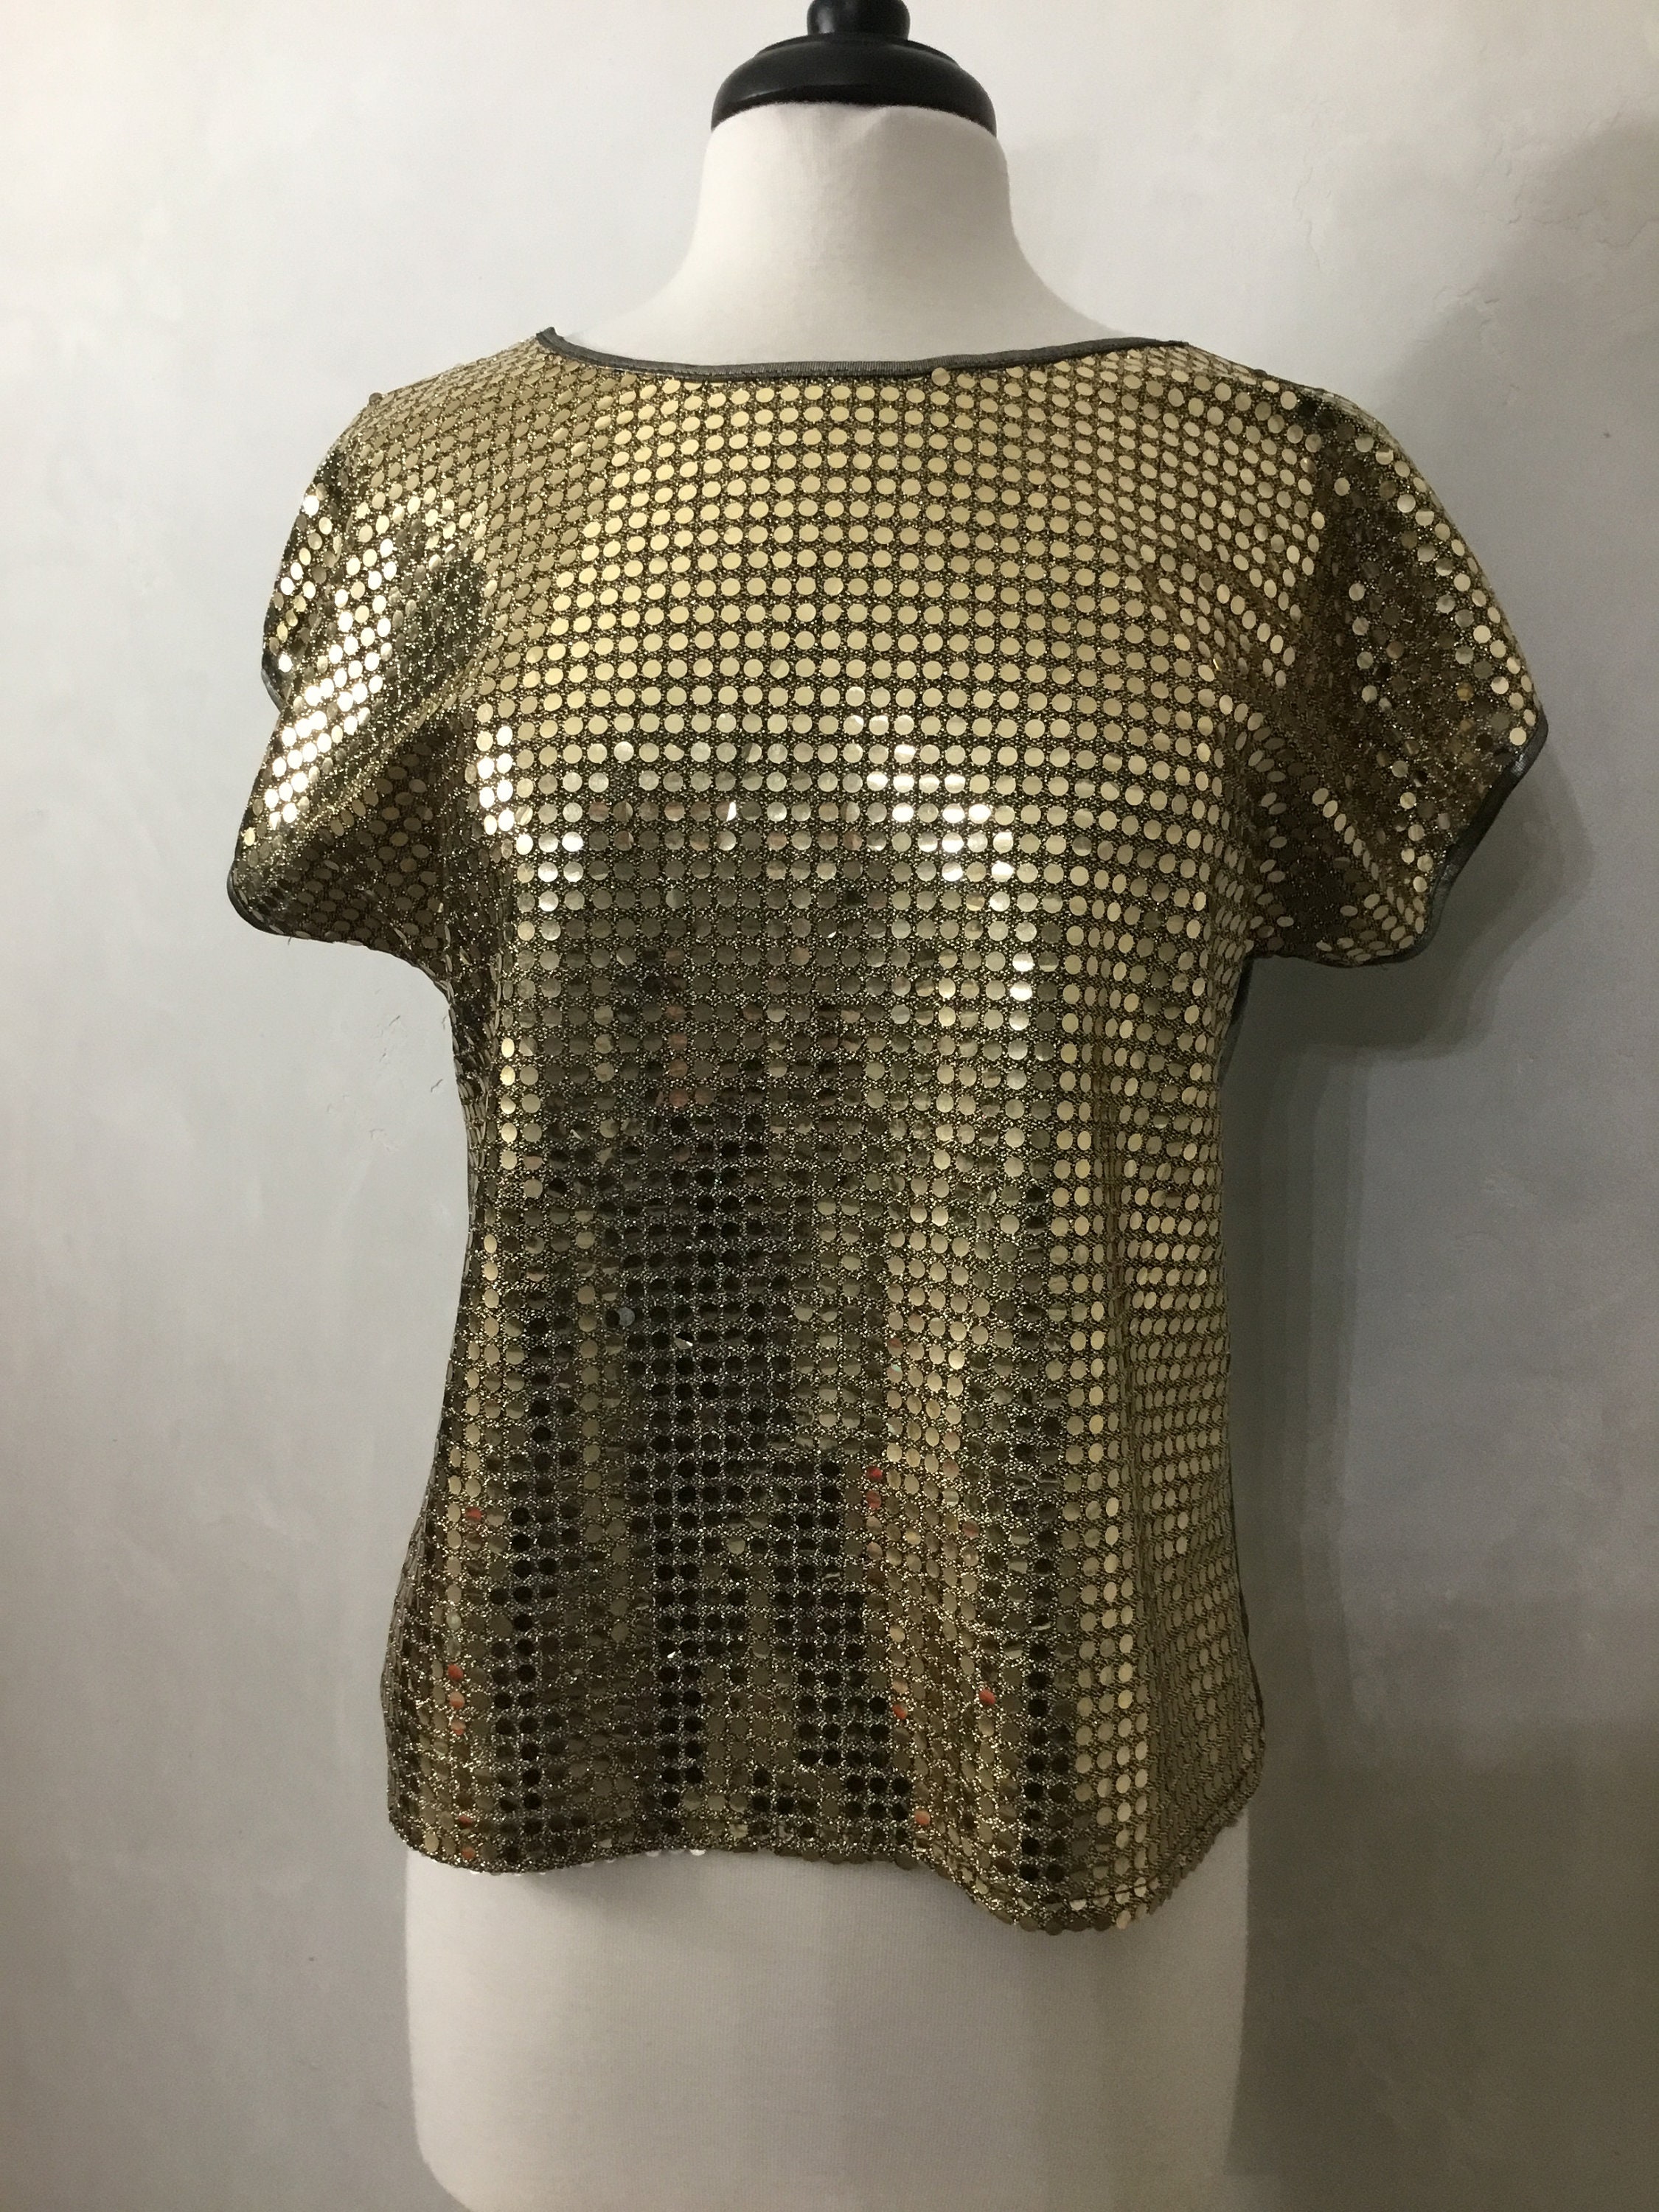 Vintage 80s Gold Sequin a Shirt. Disco Top. 70s Costume - Etsy UK